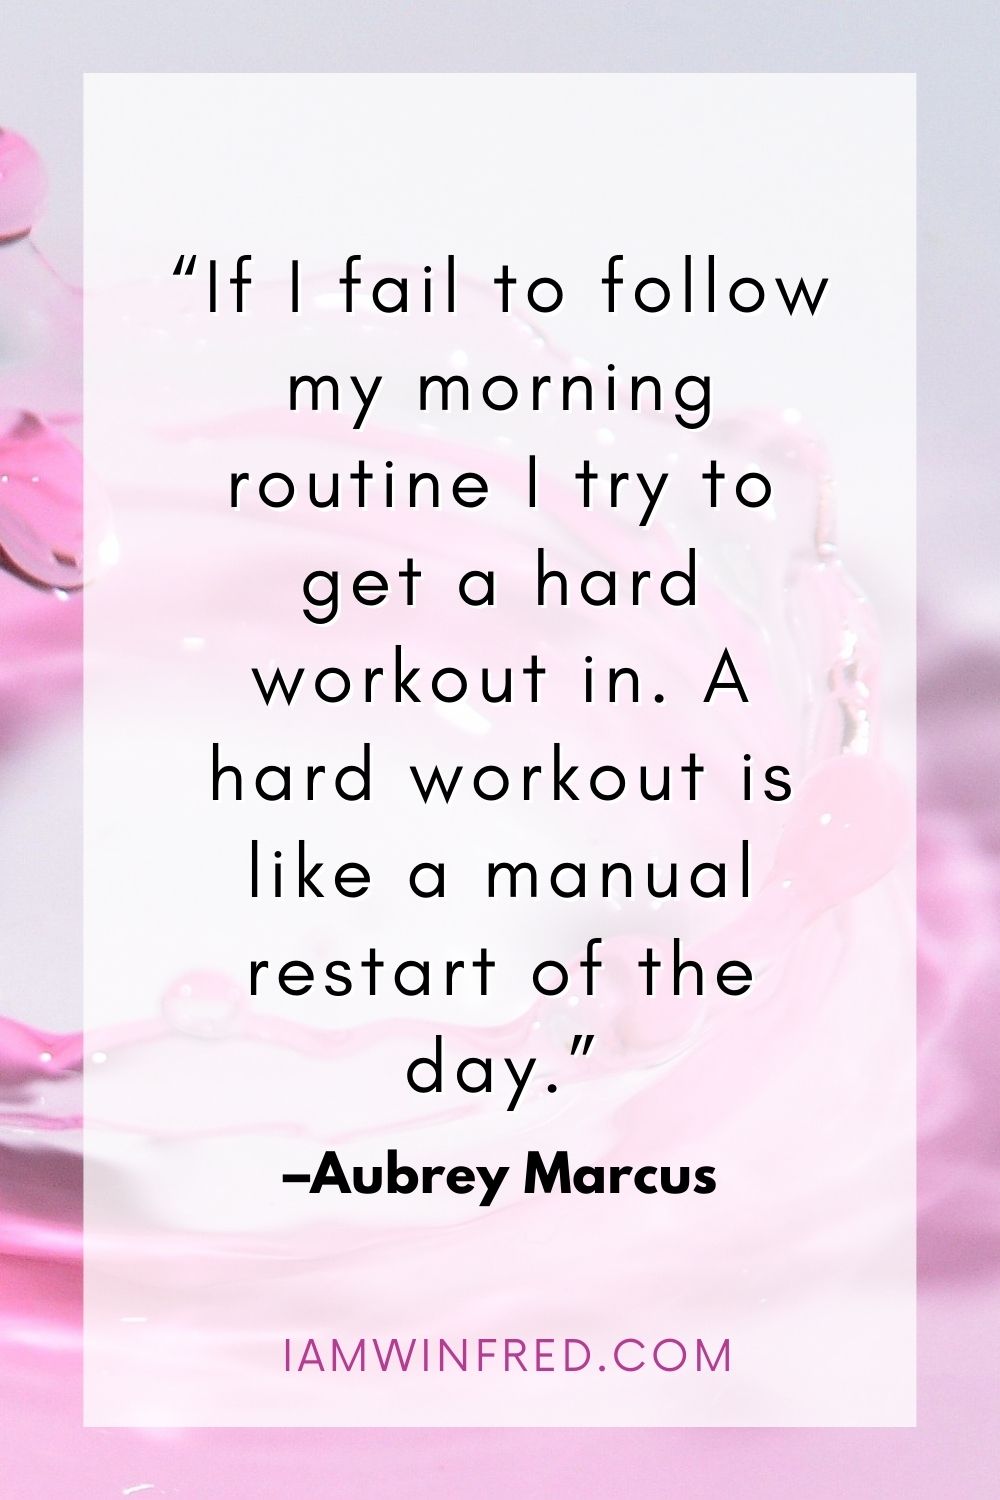 If I Fail To Follow My Morning Routine I Try To Get A Hard Workout In. A Hard Workout Is Like A Manual Restart Of The Day.